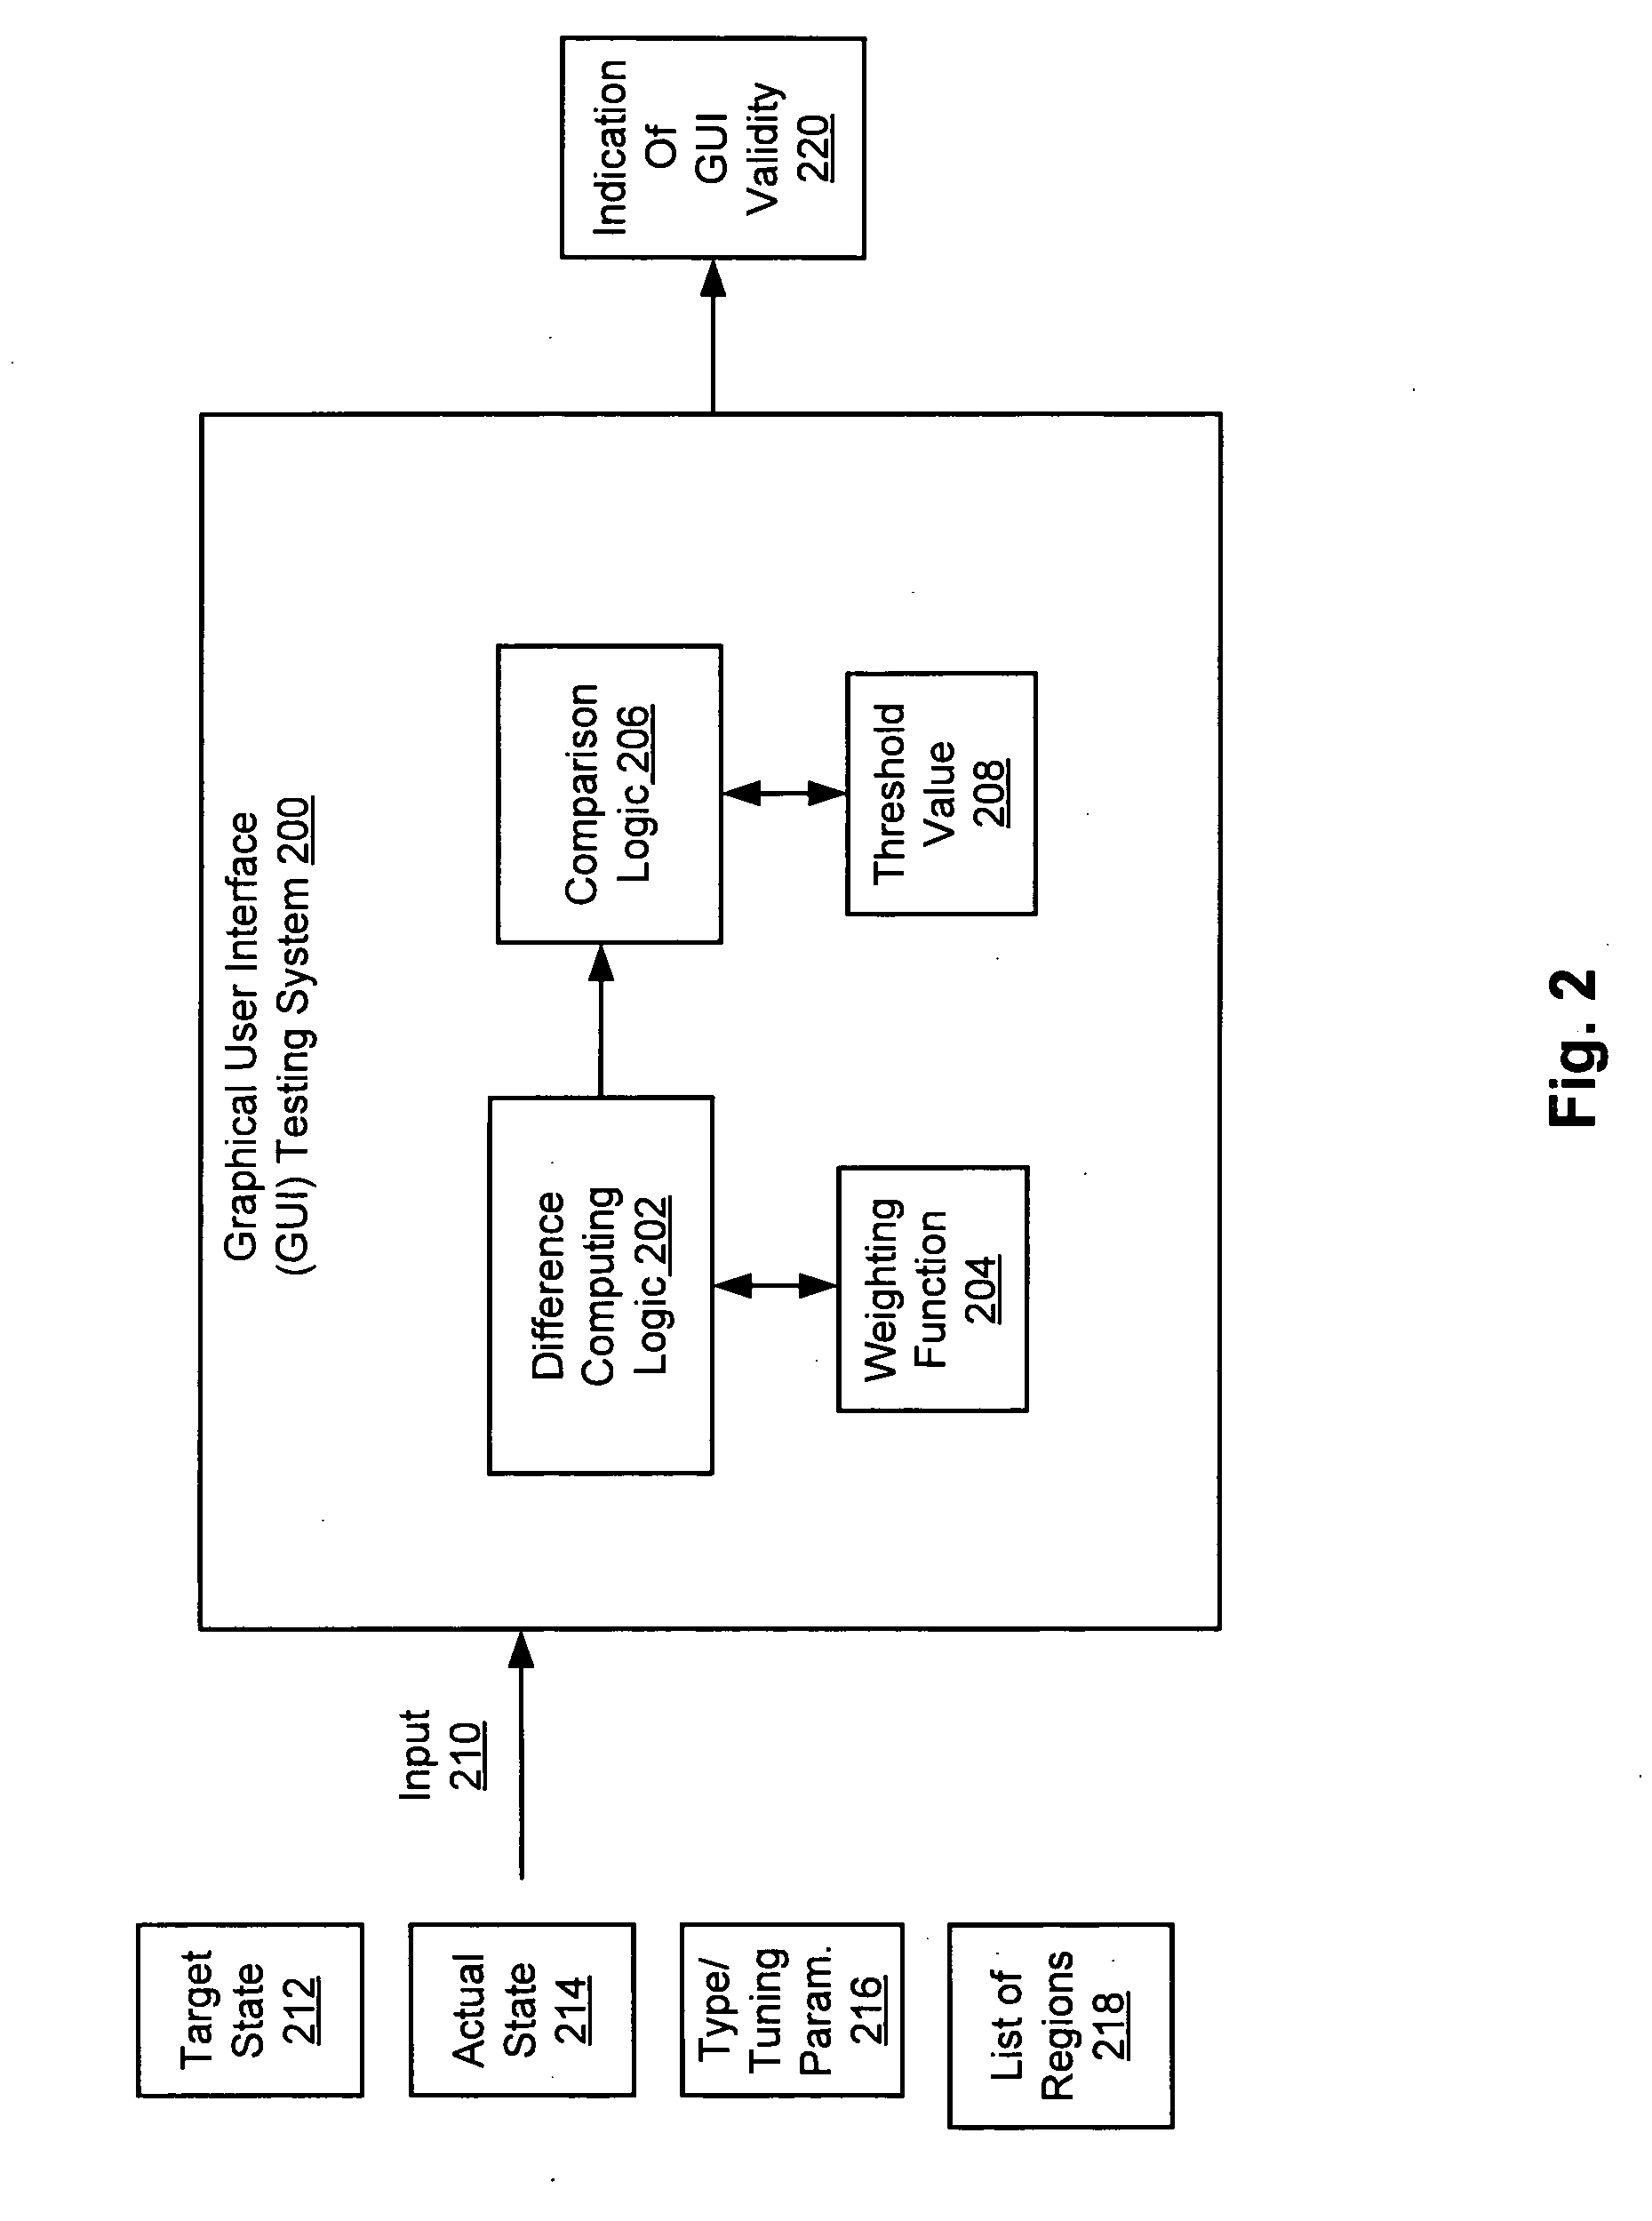 System and method for regression tests of user interfaces